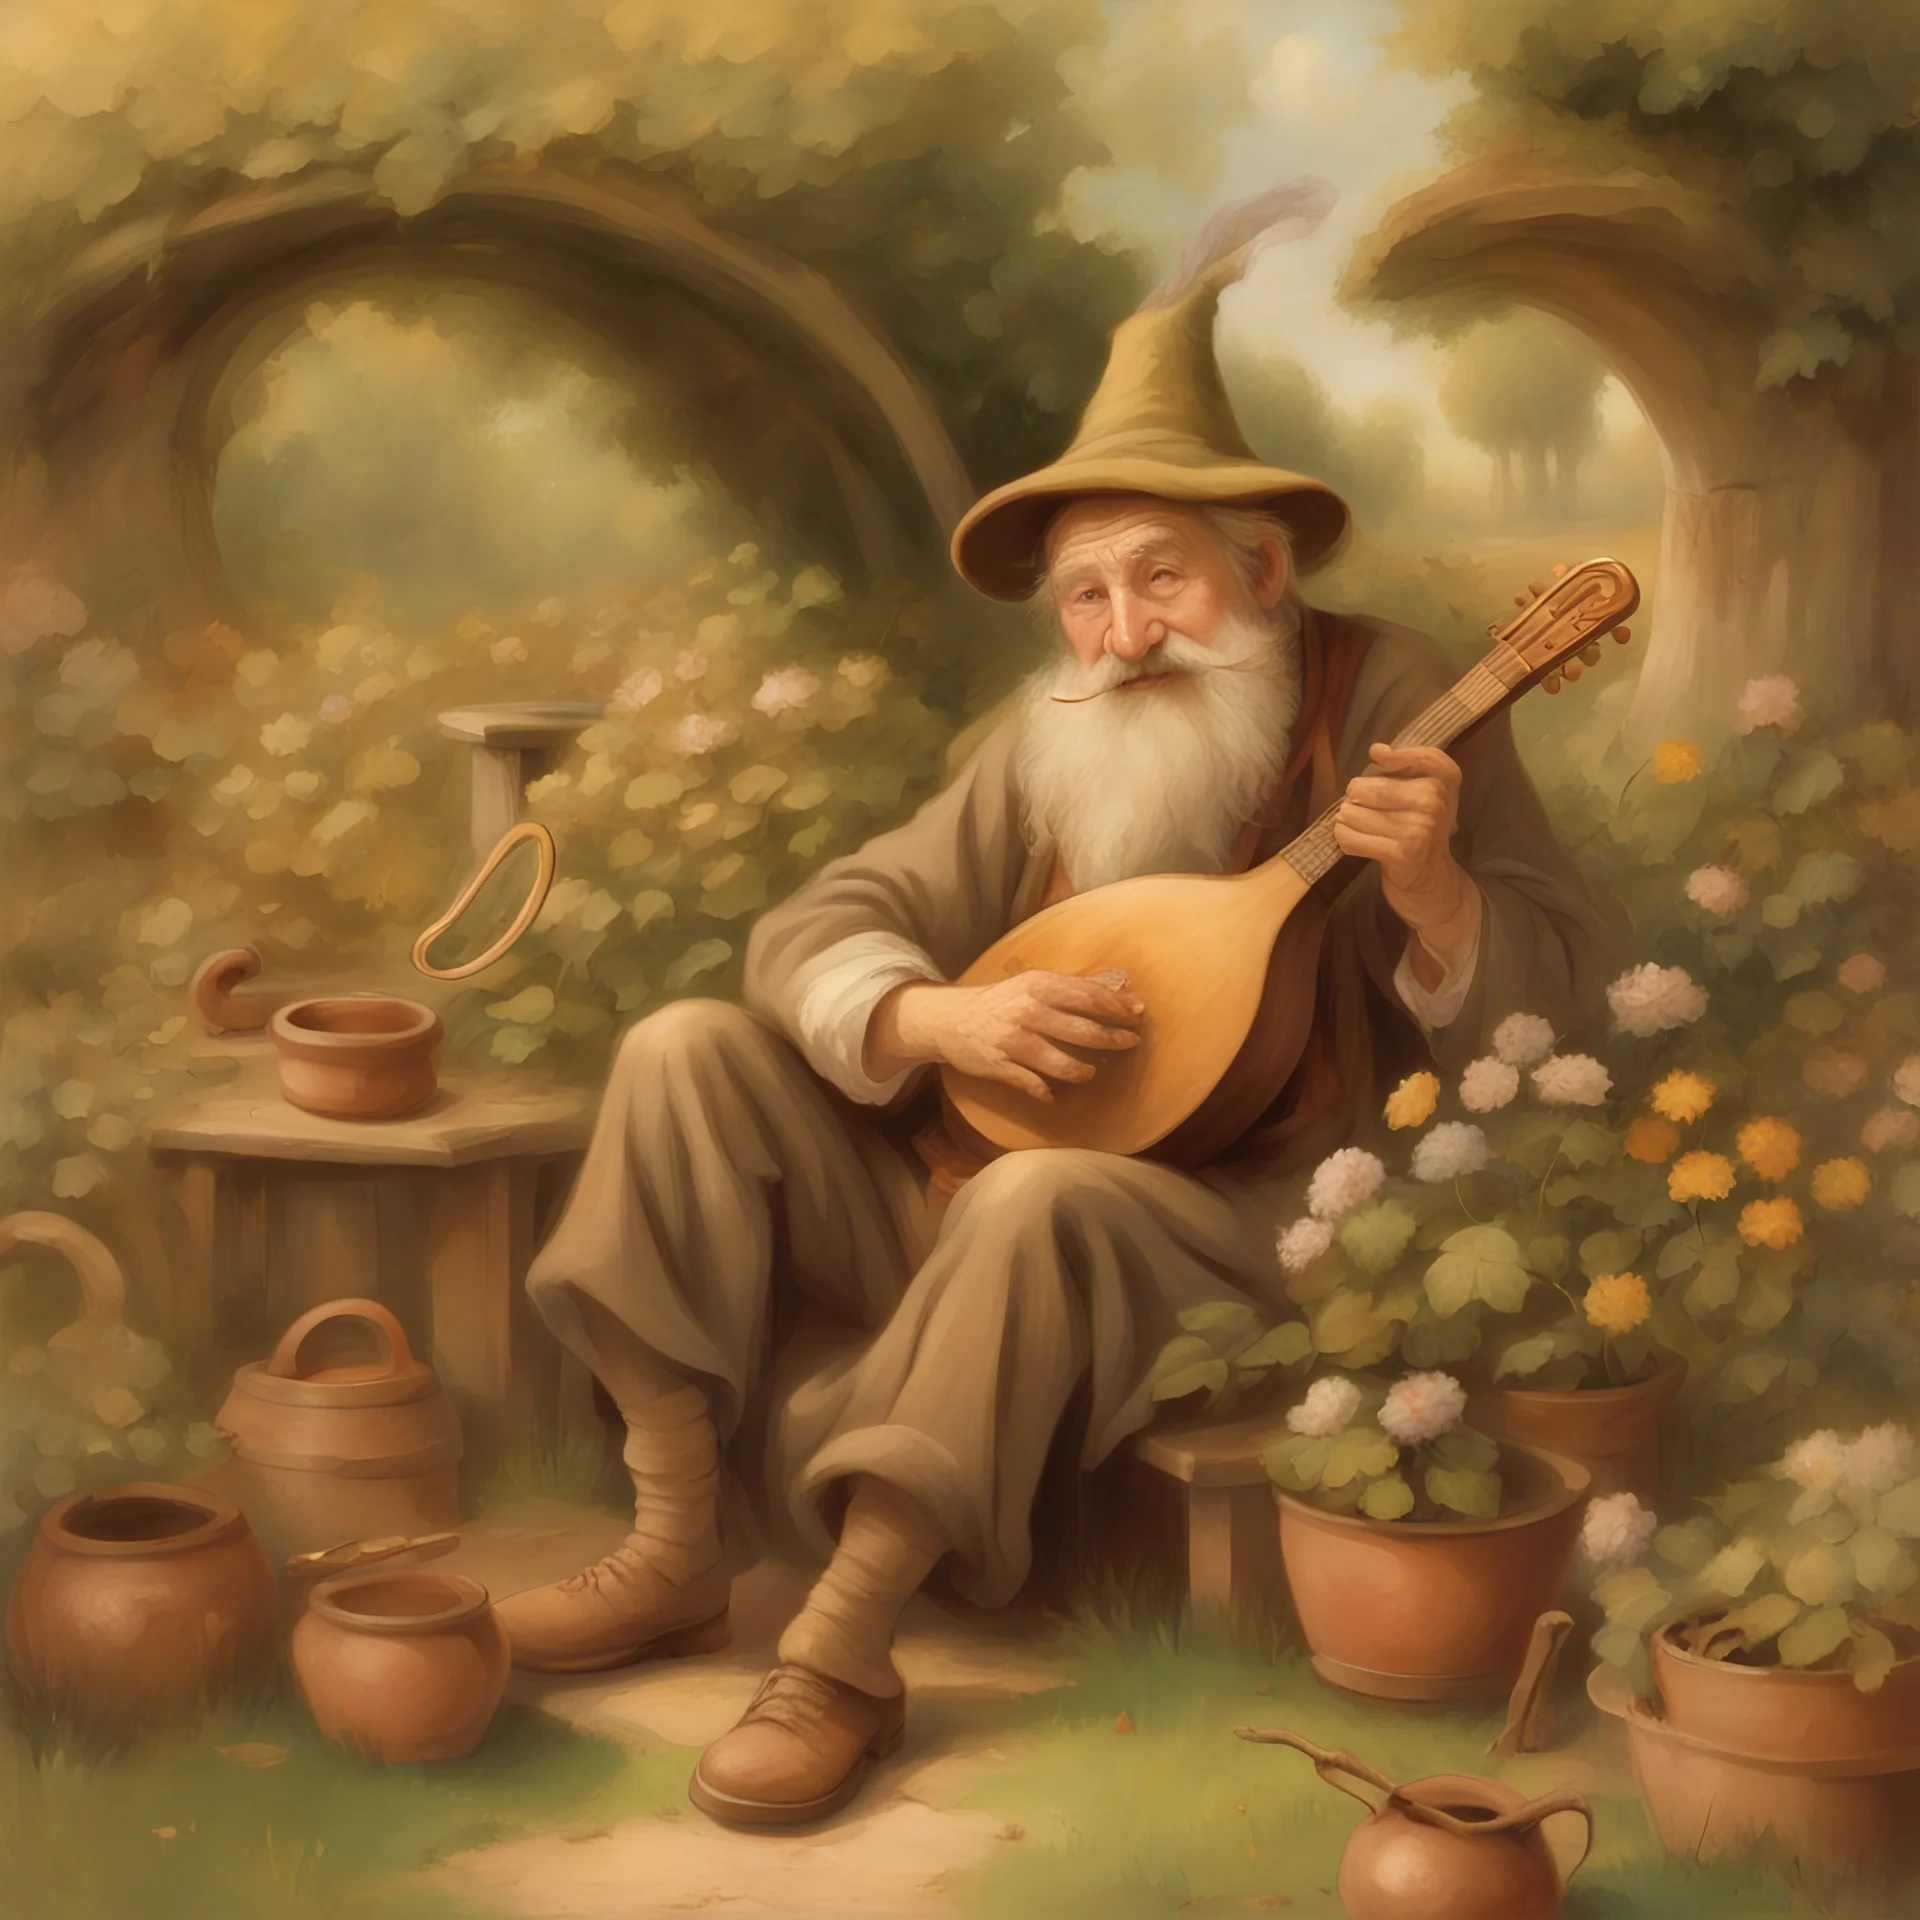 happy old halfing hobbit smoking a long stemmed tobacco pipe and playing smoking lute in his garden